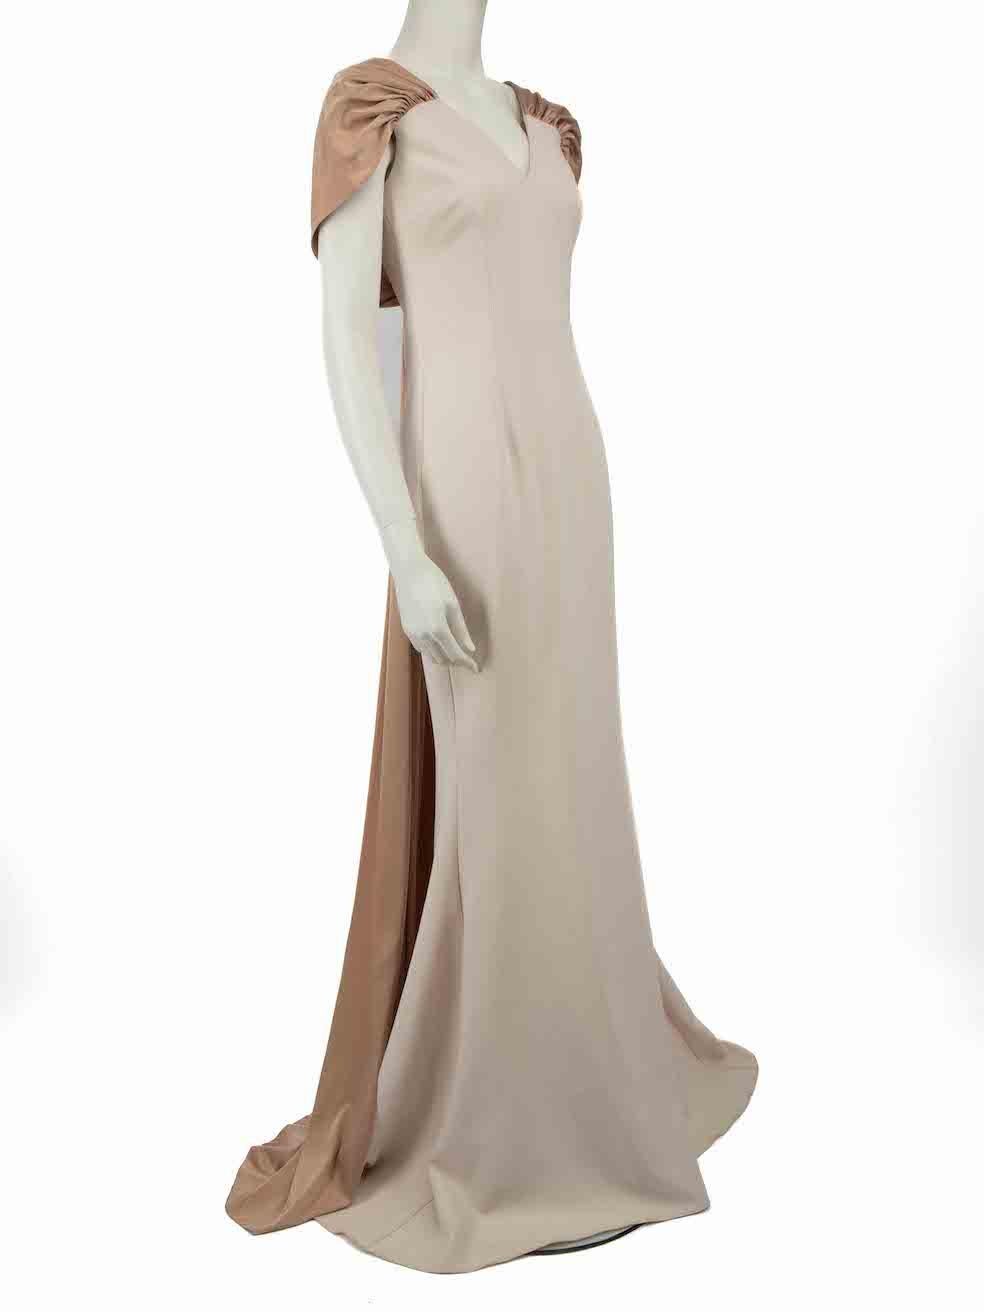 CONDITION is Very good. Minimal wear to dress is evident. Minimal wear to the fabric surface with some mild discolouration seen at the hem on this used Safiyaa designer resale item.
 
 Details
 Beige
 Polyester
 Gown
 Sleeveless
 V-neck
 Maxi
 Satin